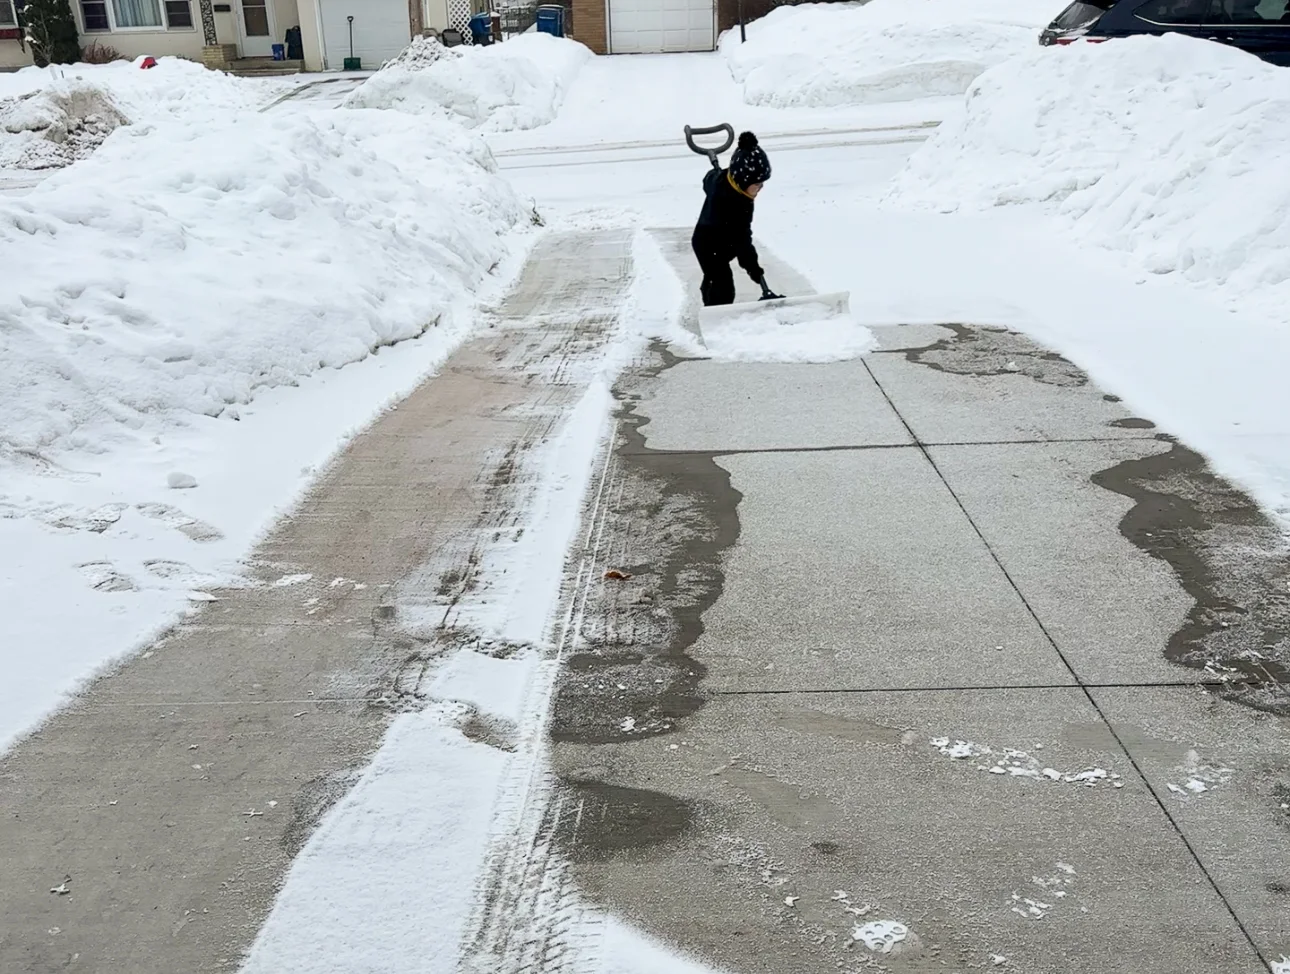 Montessori toddler plays in the outdoors during winter by shoveling a driveway.